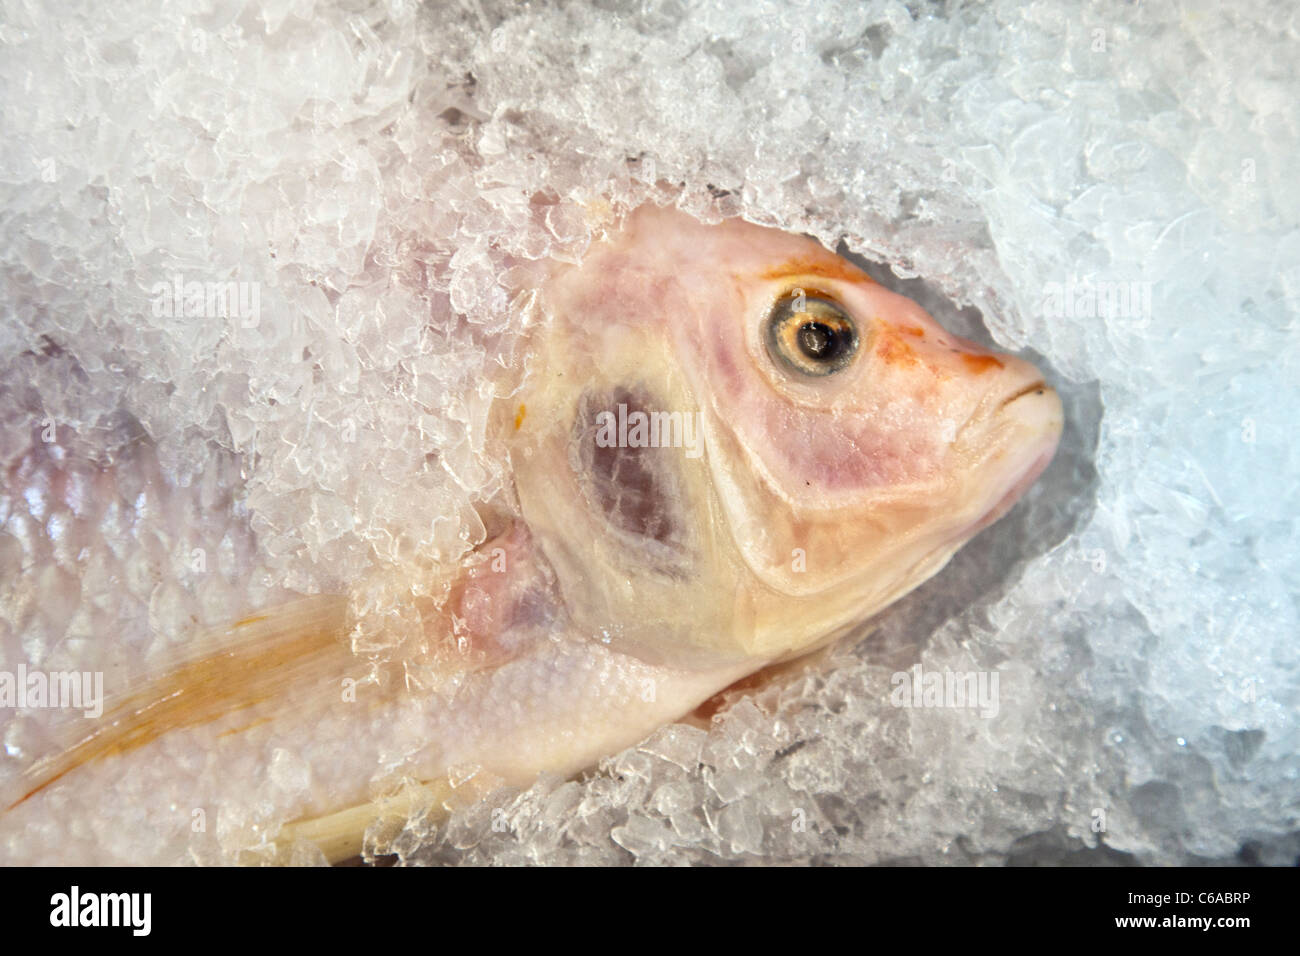 bright eyed delicately colored fresh Tilapia fish displayed for sale on bed of crushed ice in fish department of US supermarket Stock Photo